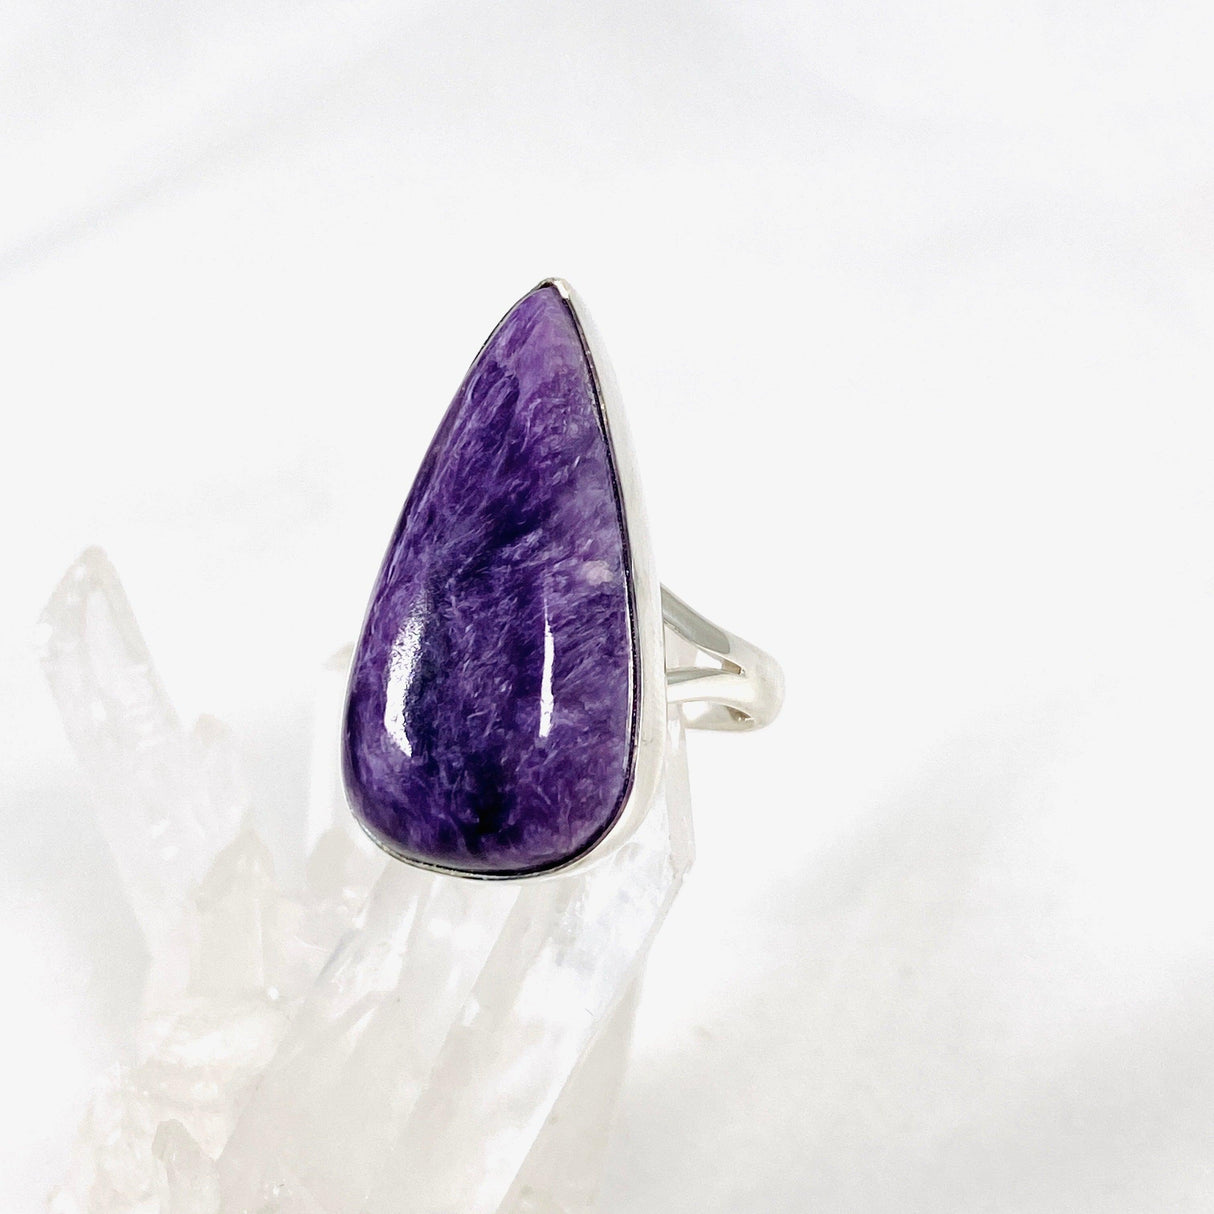 Purple Charoite tear drop ring in sterling silver sitting on a crystal cluster